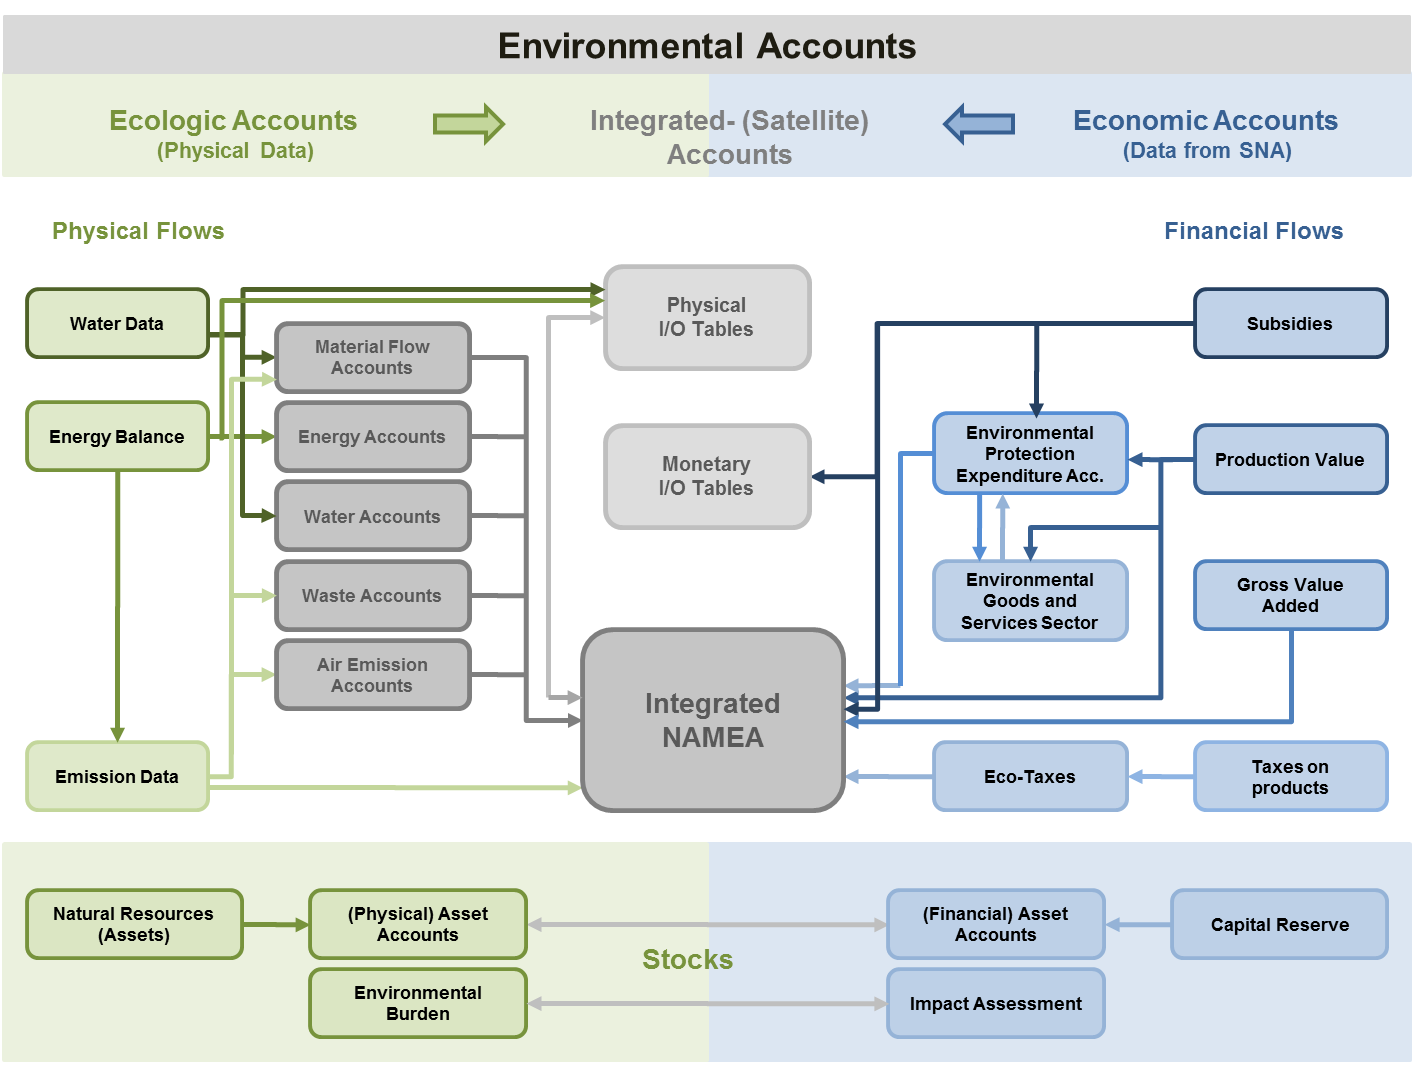 Chart with details of data and information flows in environmental accounts